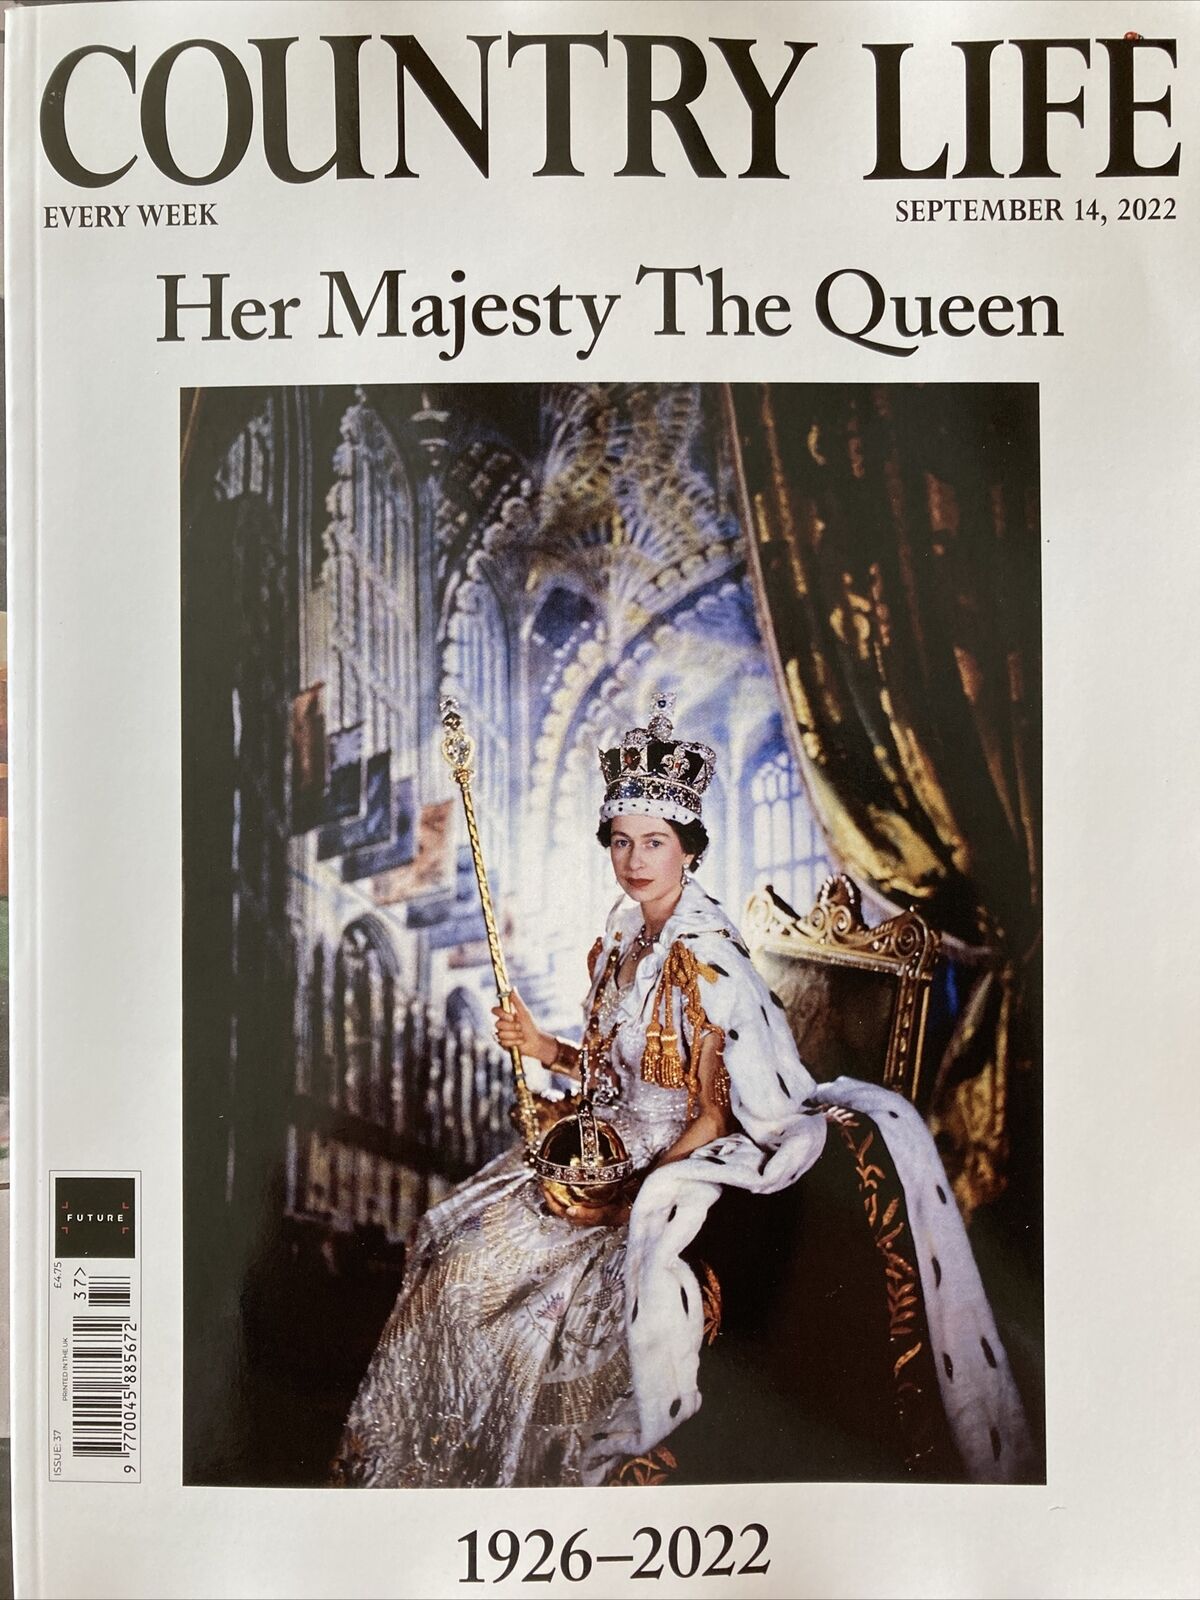 Queen Consort guest-edited biggest-selling Country Life magazine